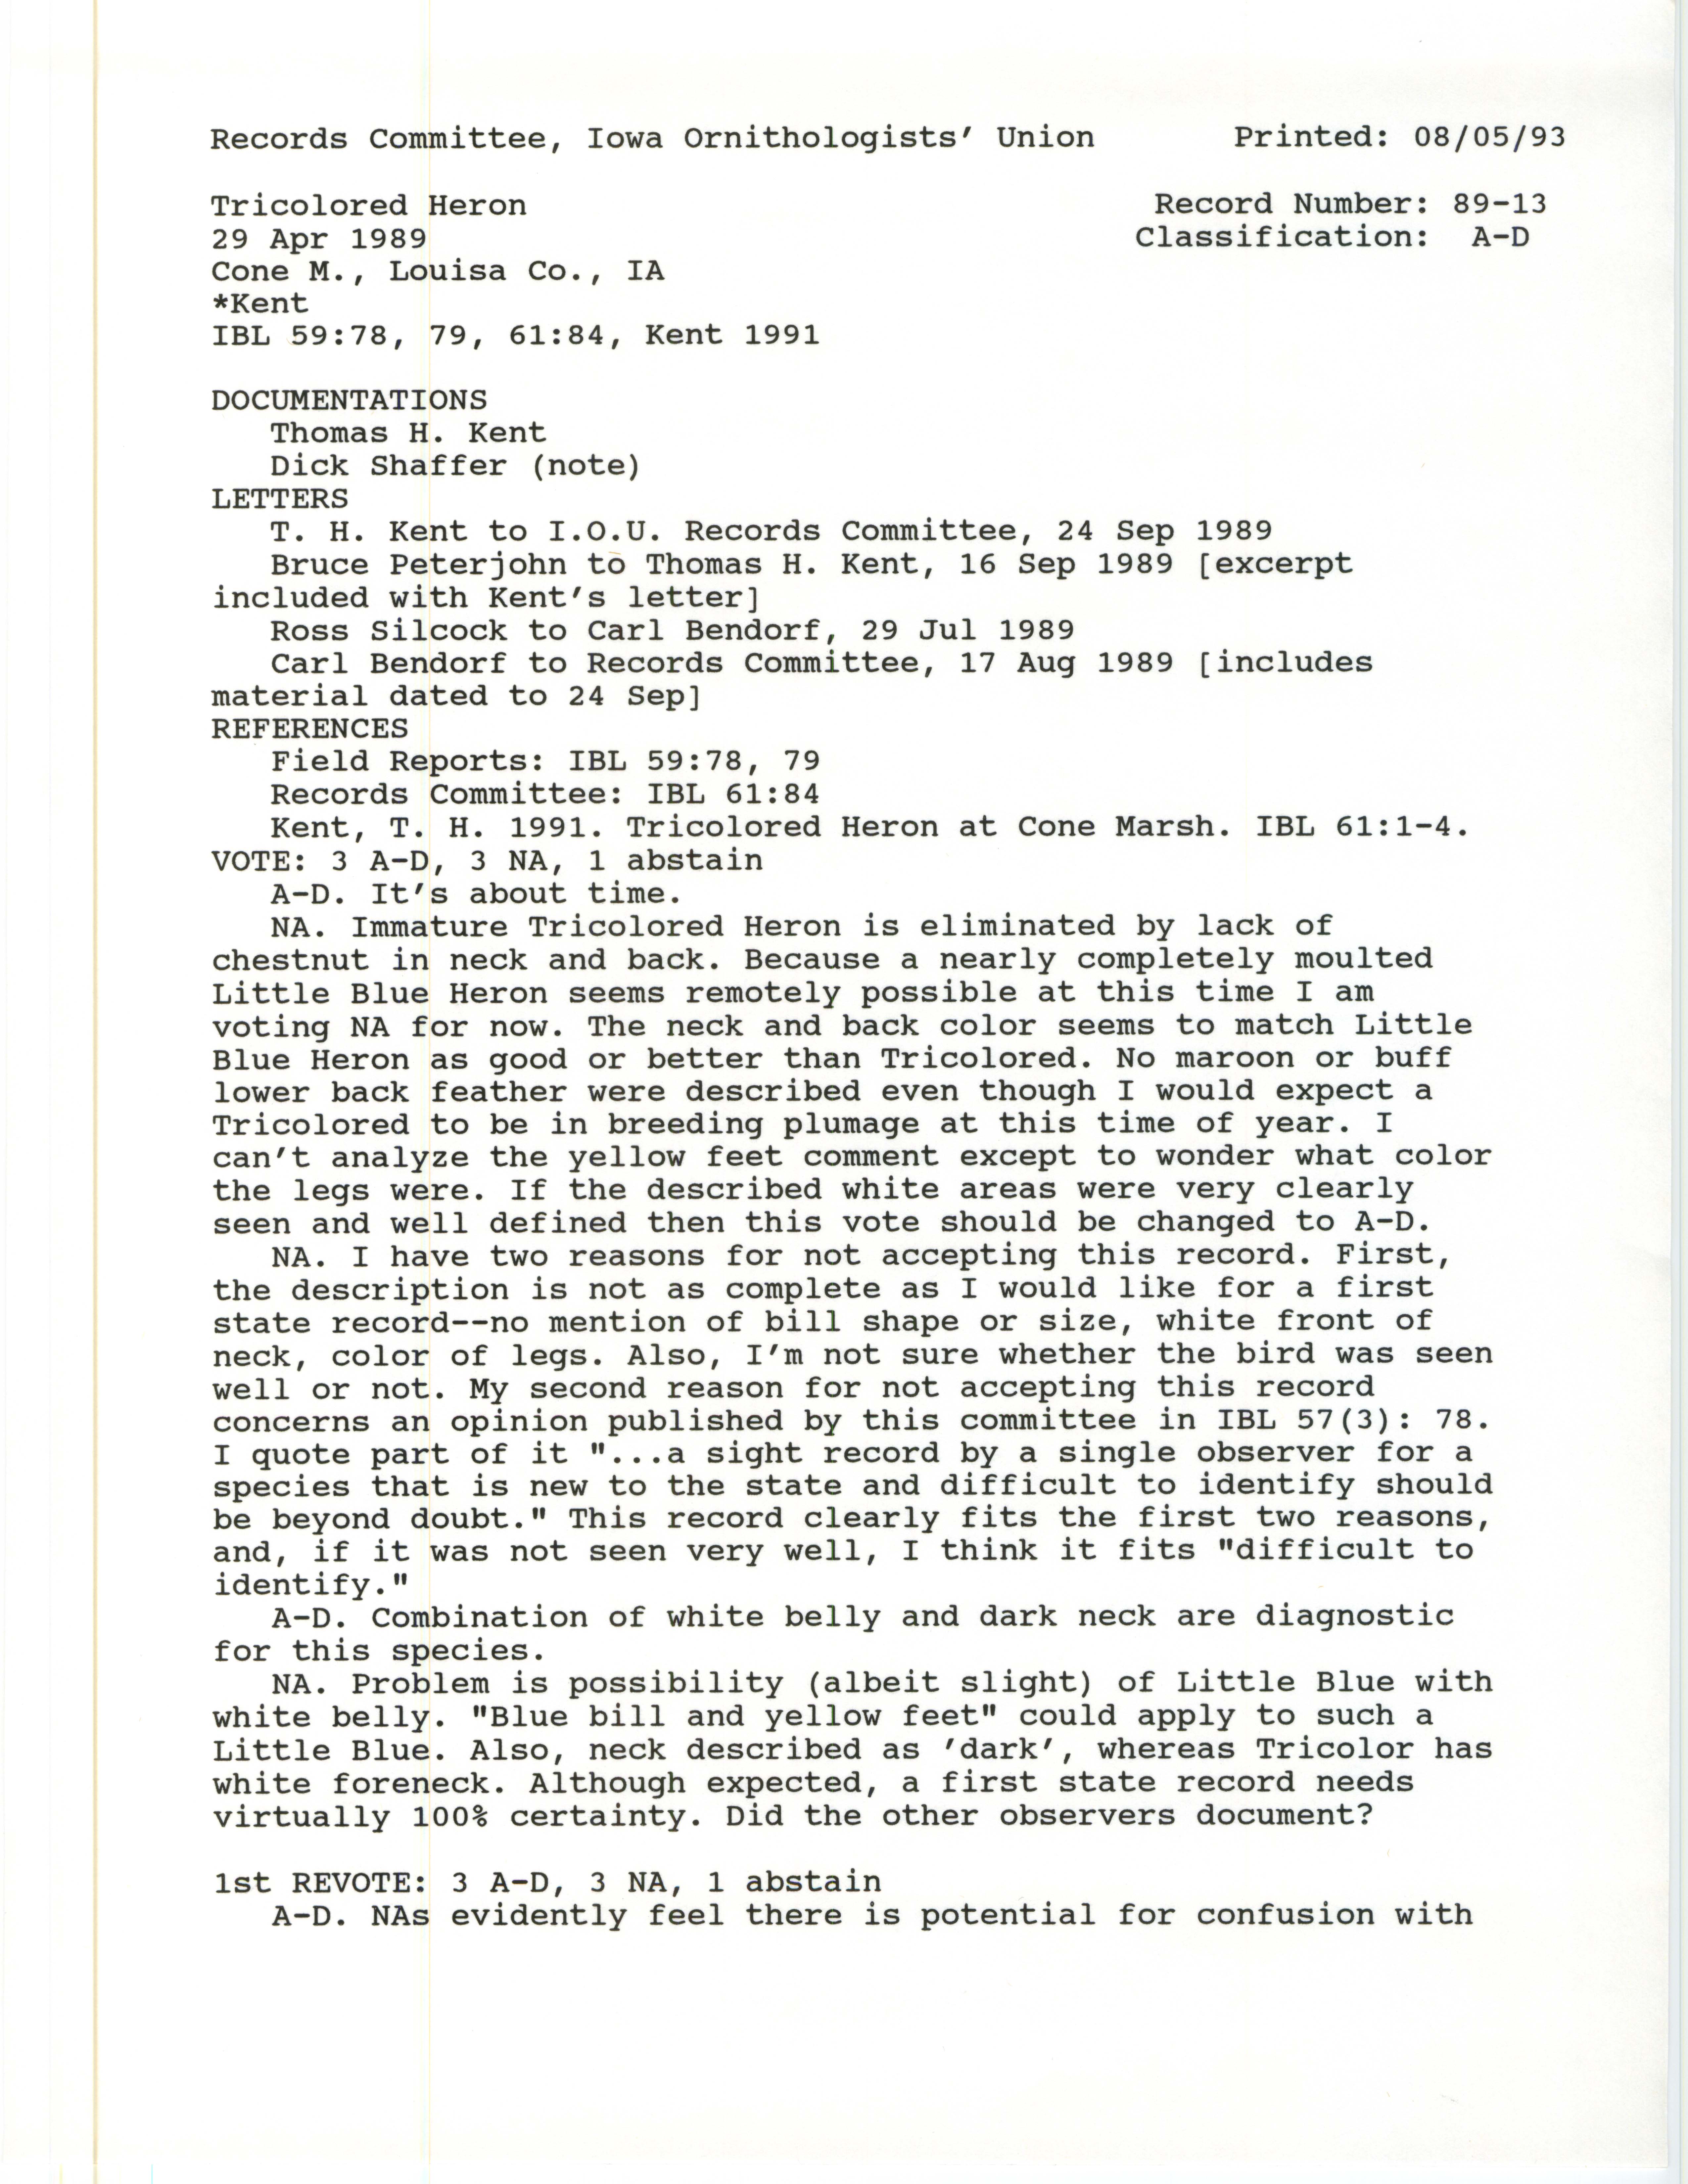 Records Committee review for rare bird sighting of Tricolored Heron at Cone Marsh, 1989